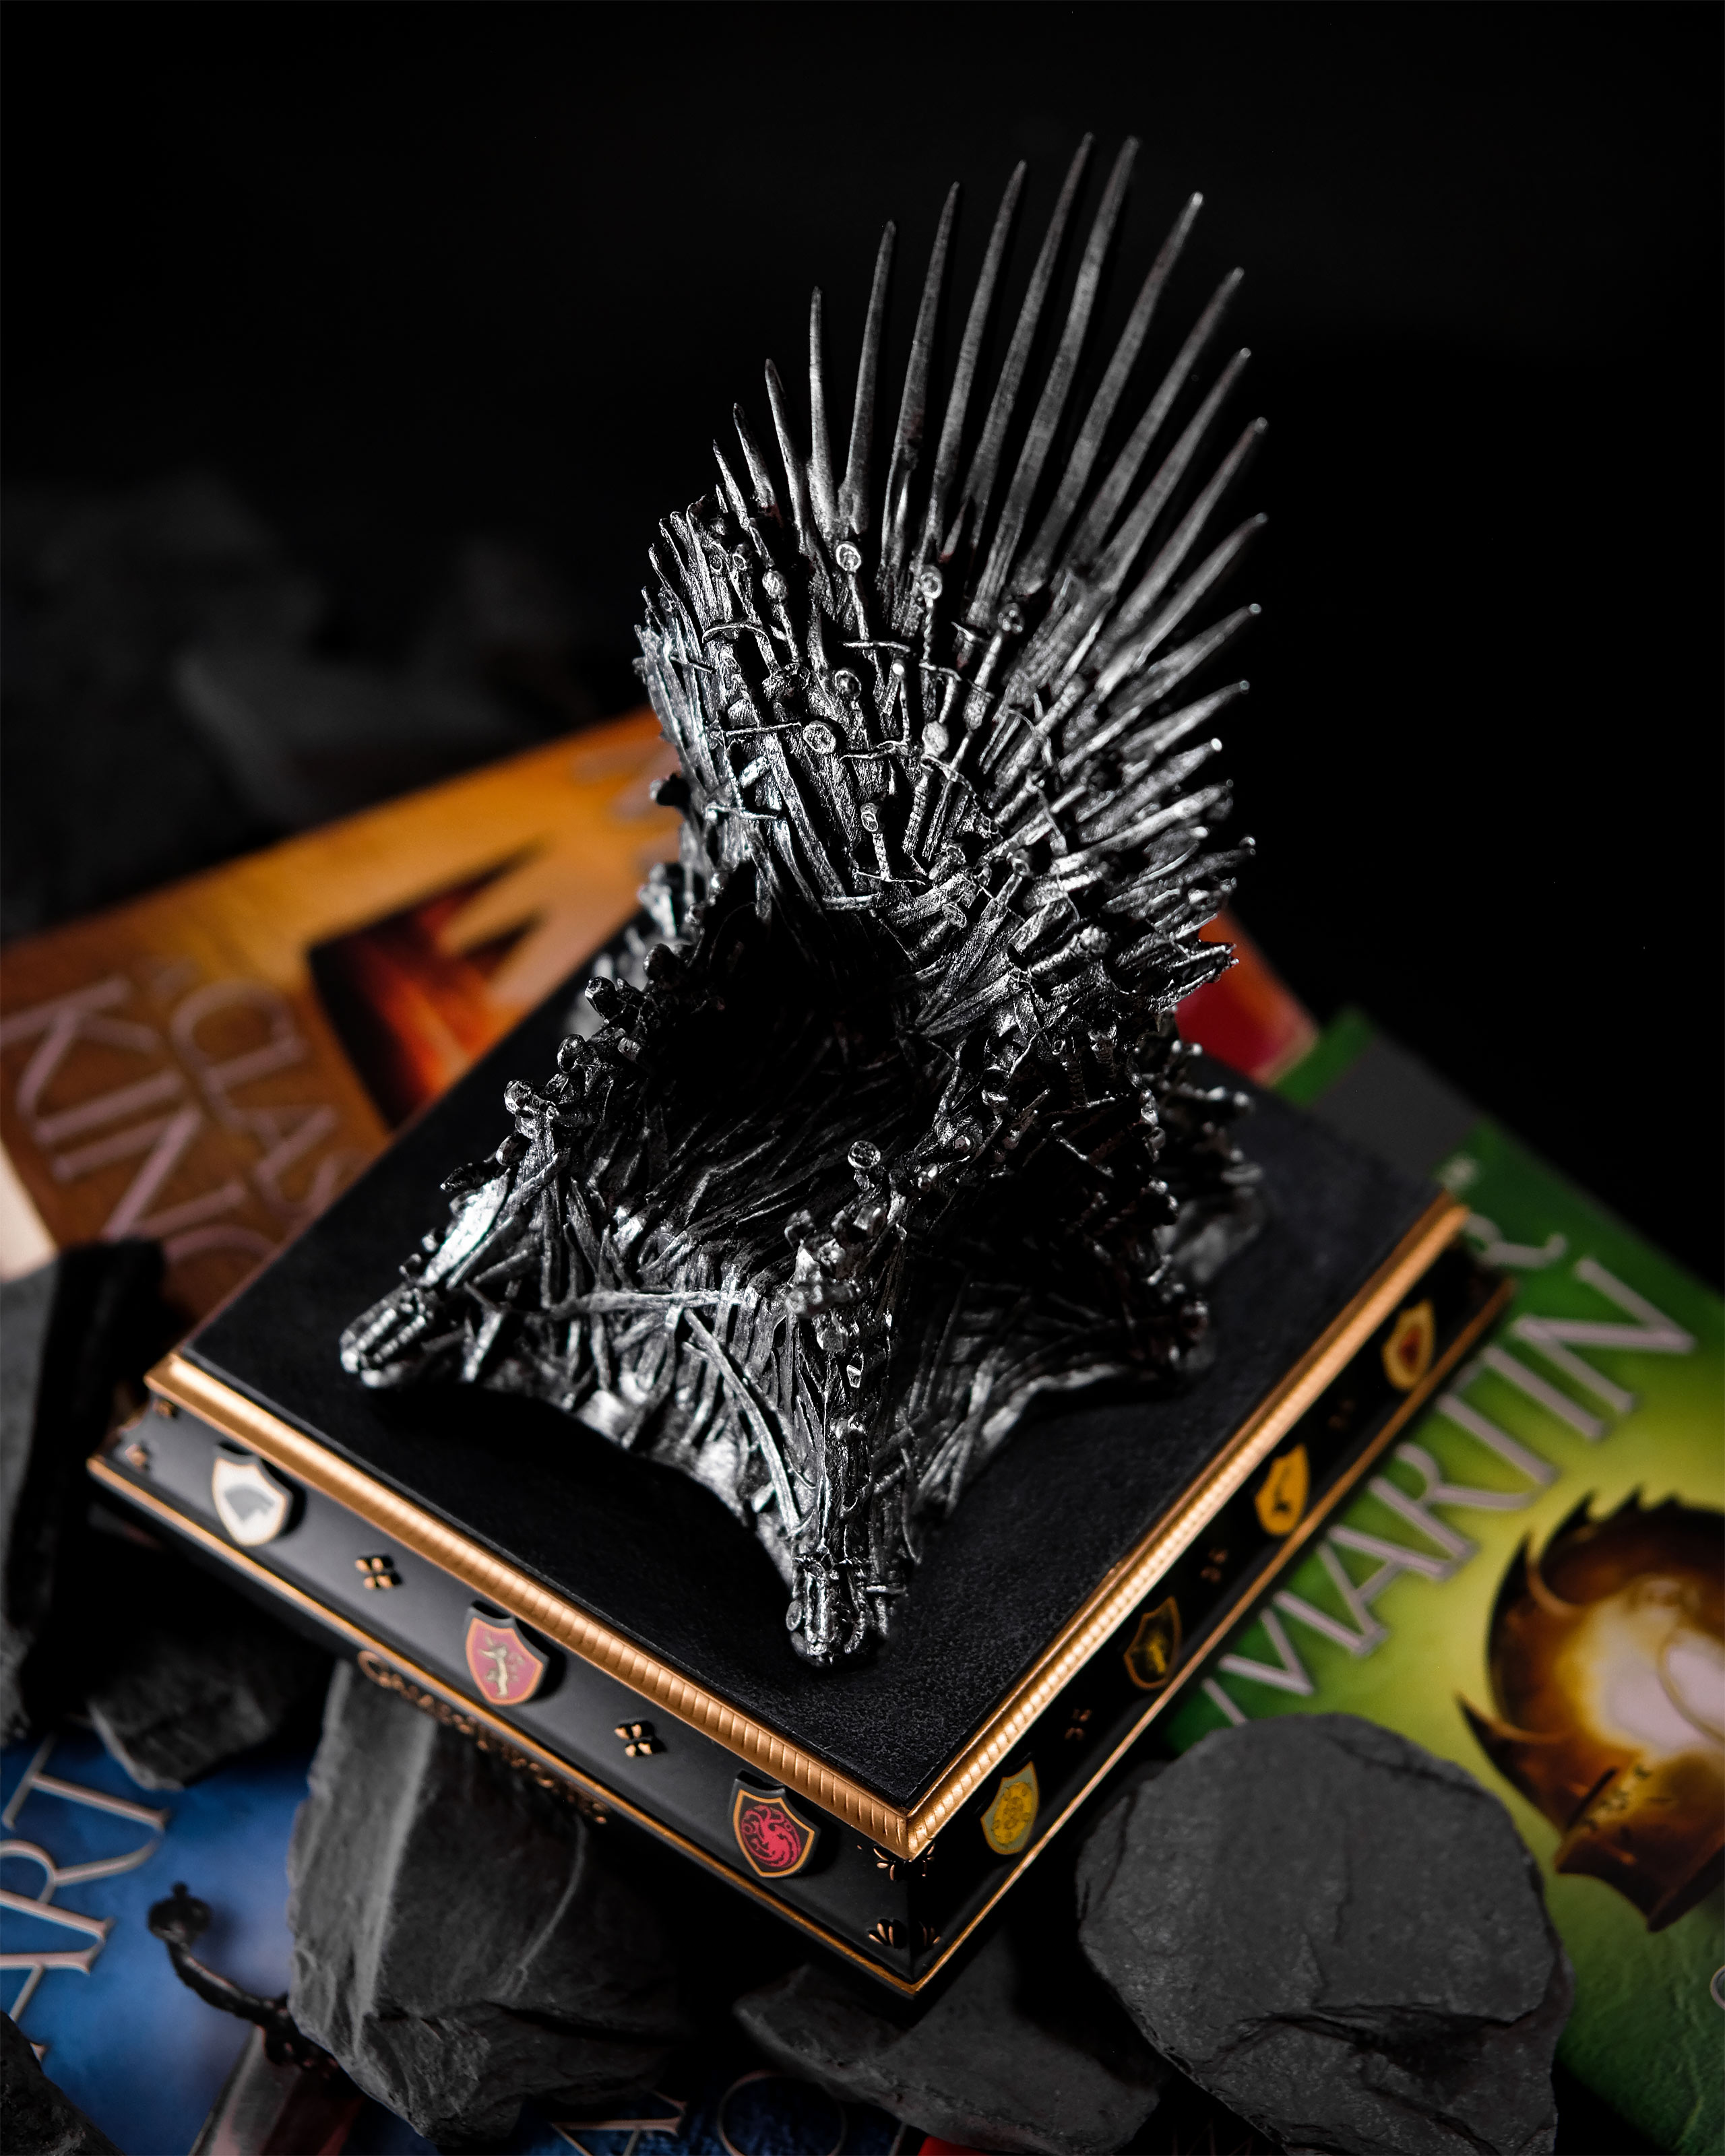 Game of Thrones - Iron Throne Bookend